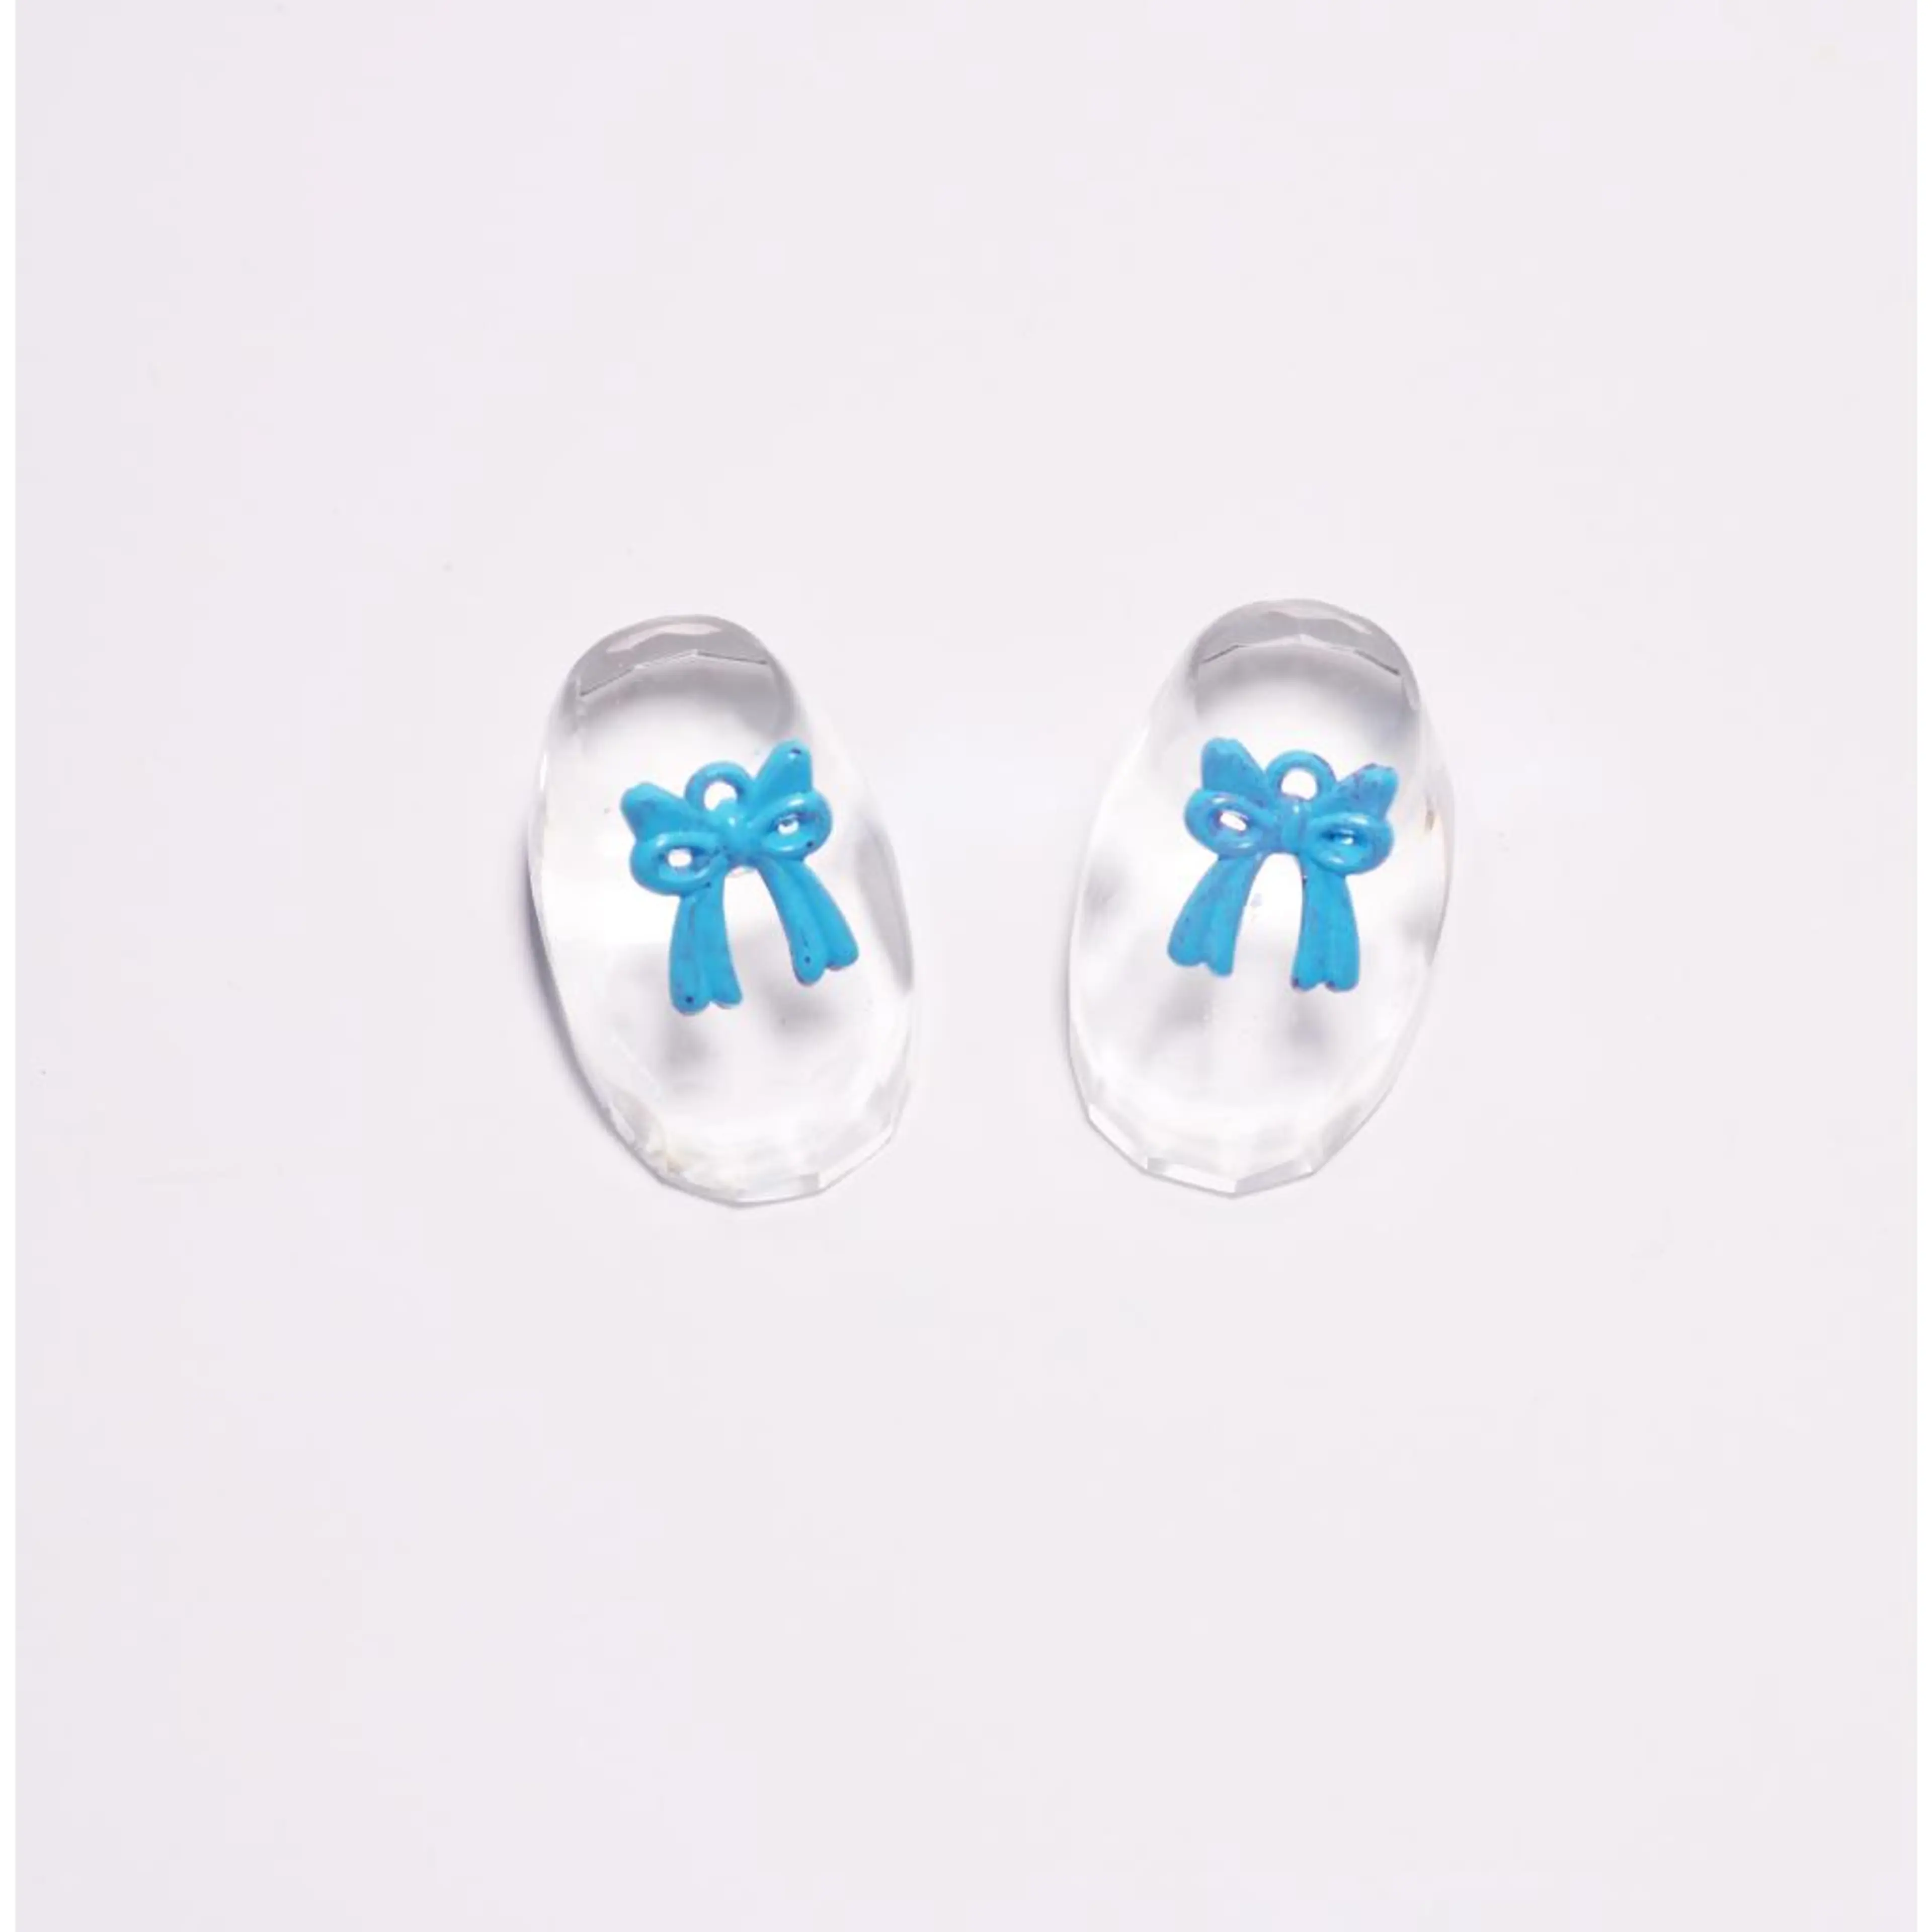 Crystal Boots Figurines